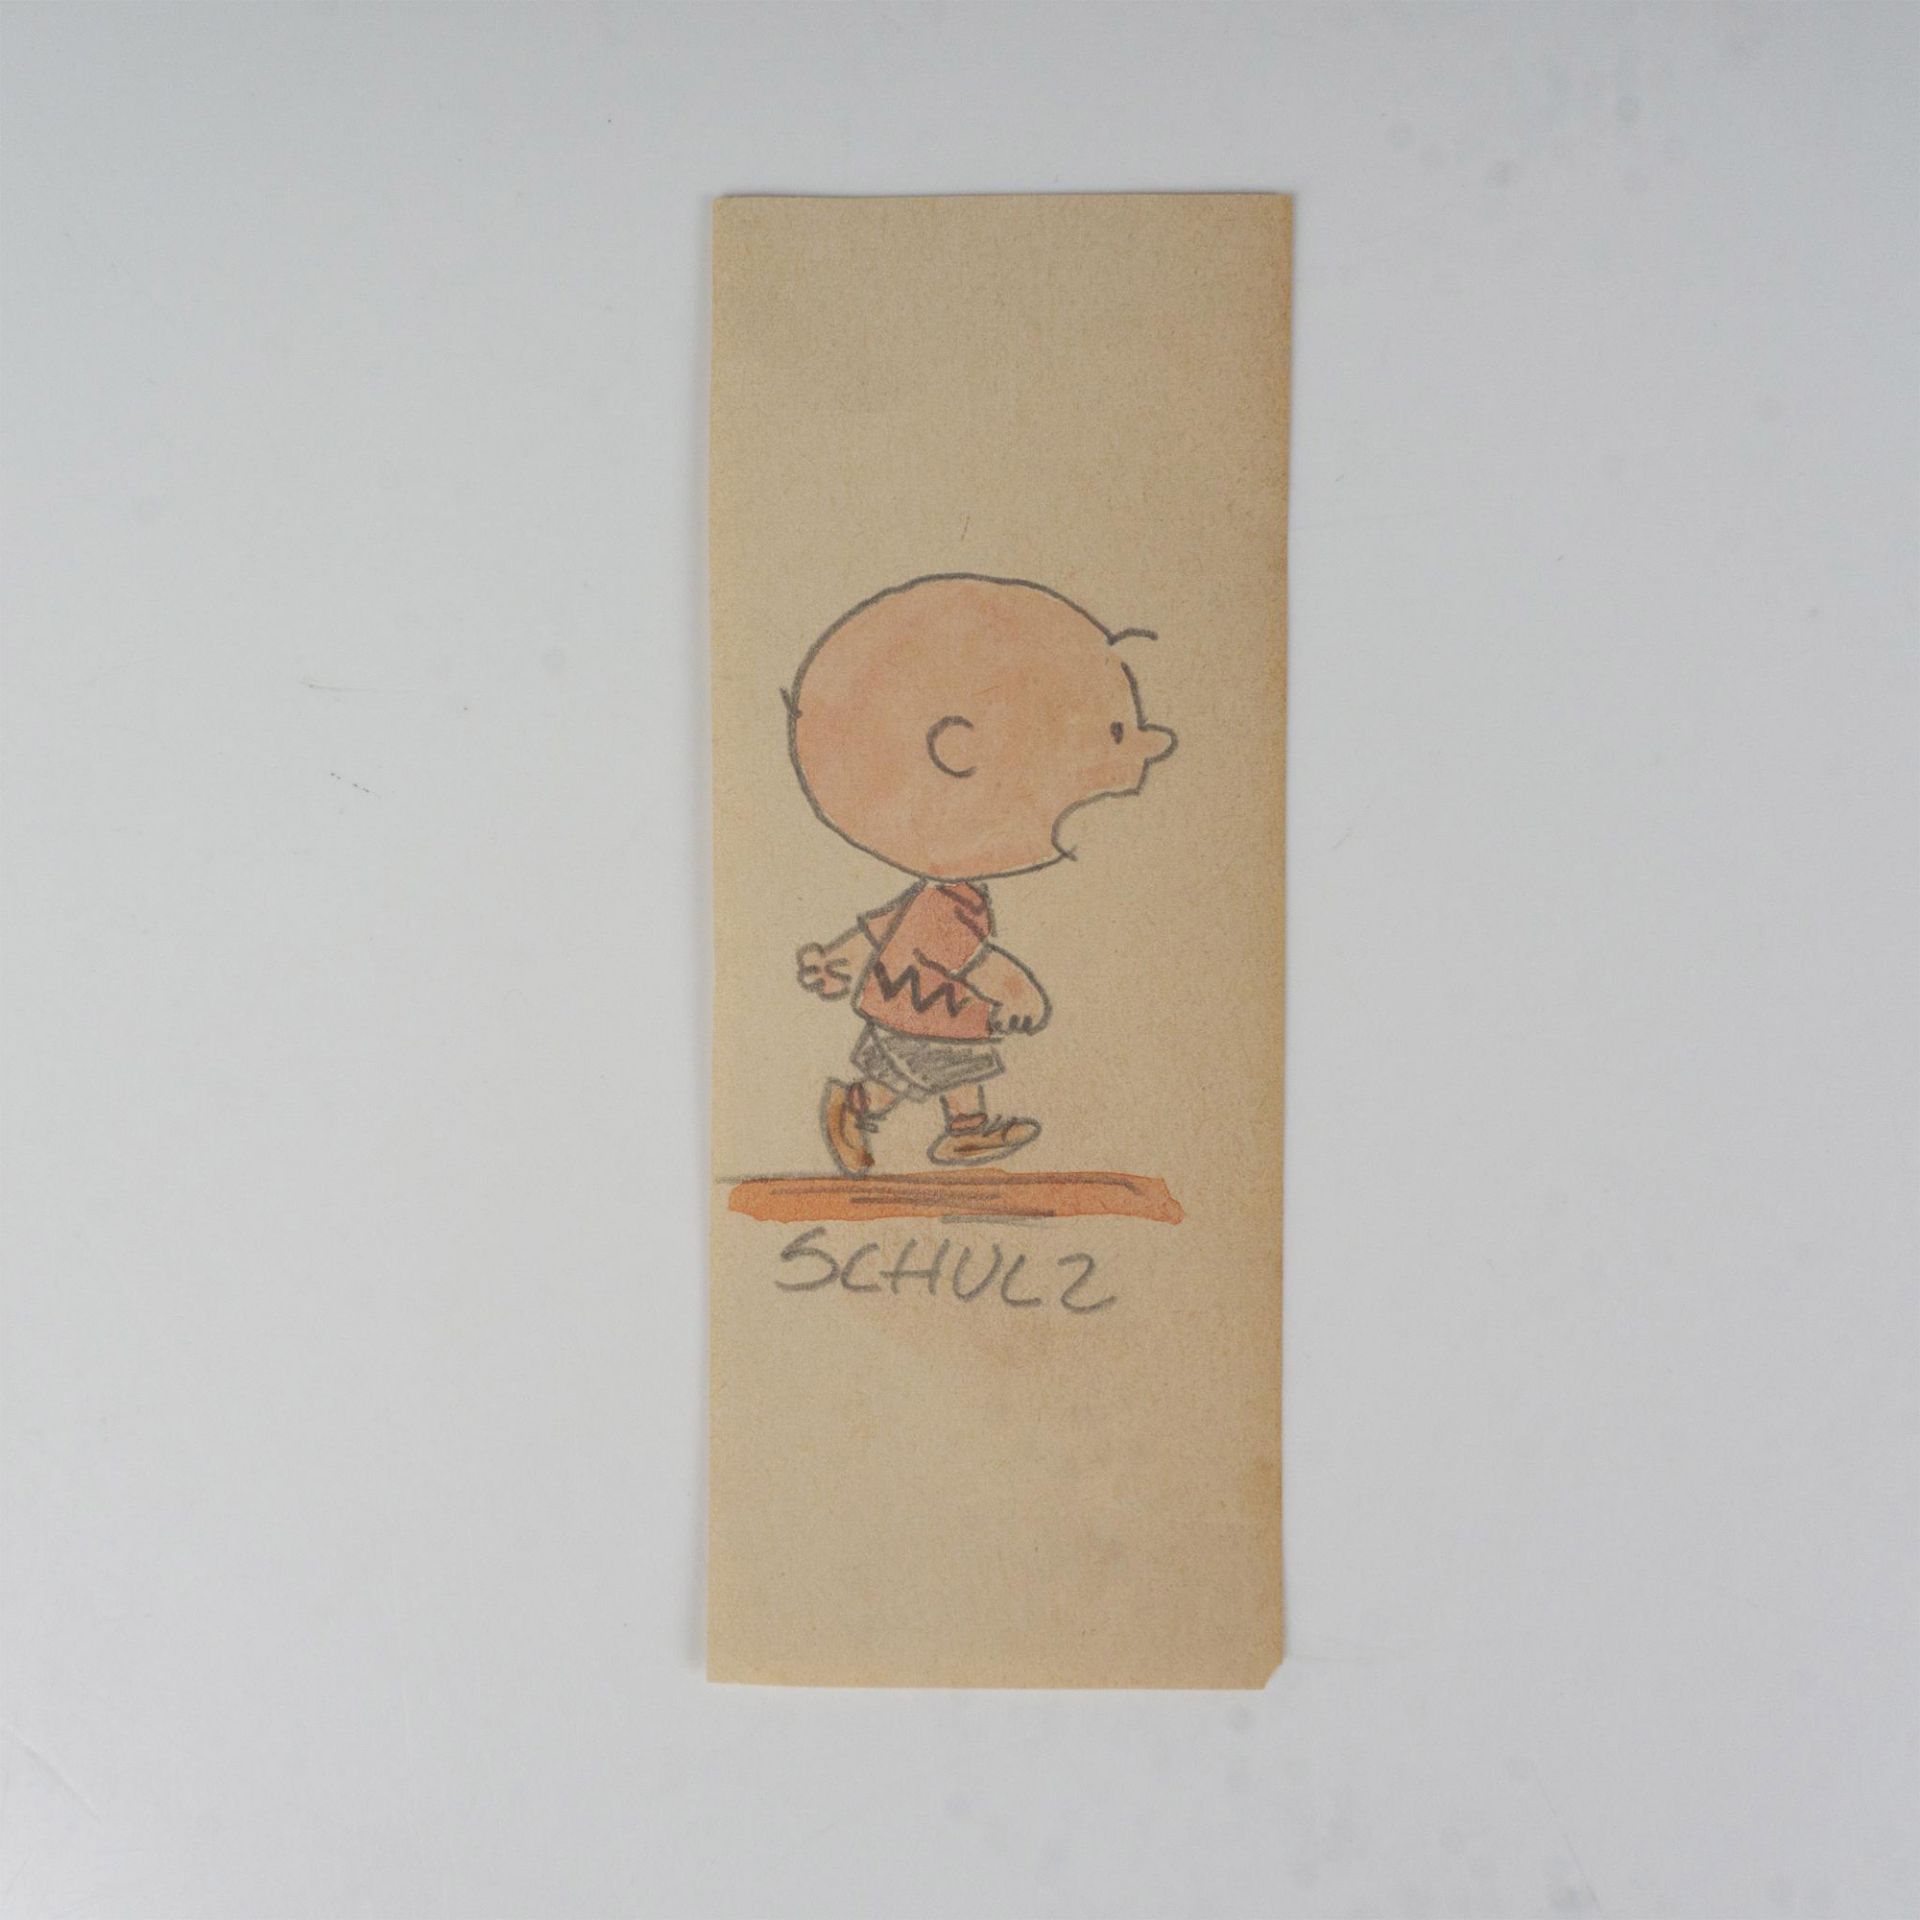 Charles Schulz (attr.) Graphite Drawing on Paper, Signed - Image 2 of 3